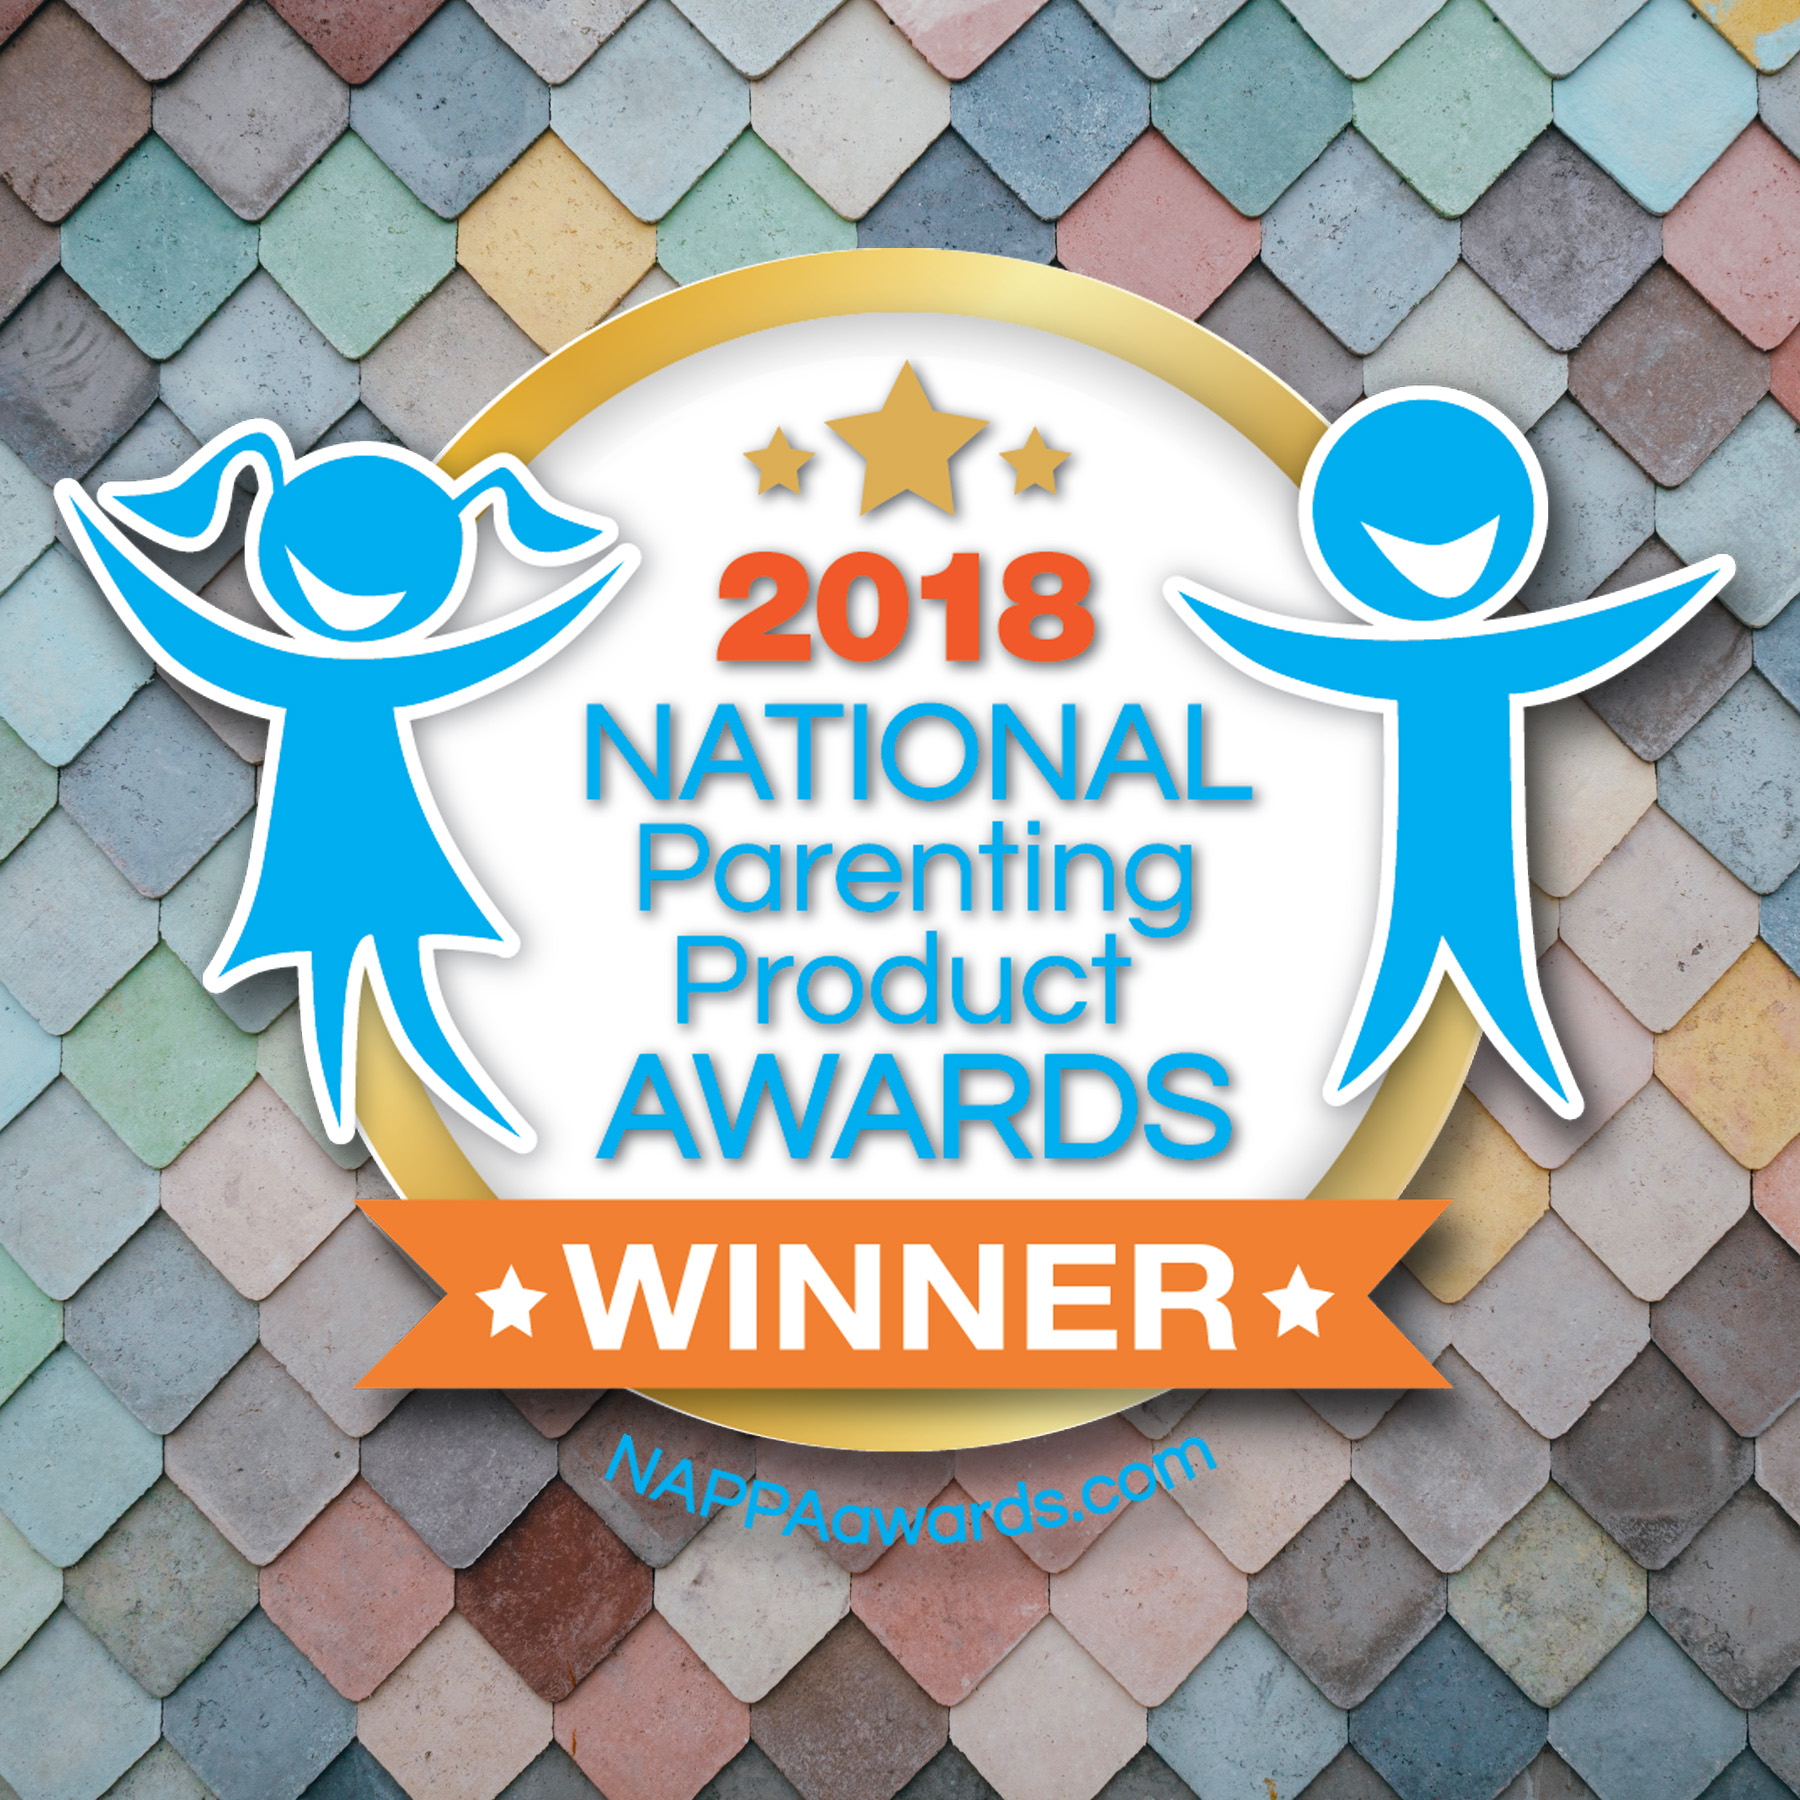 NATIONAL PARENTING PRODUCT AWARDS WINNER